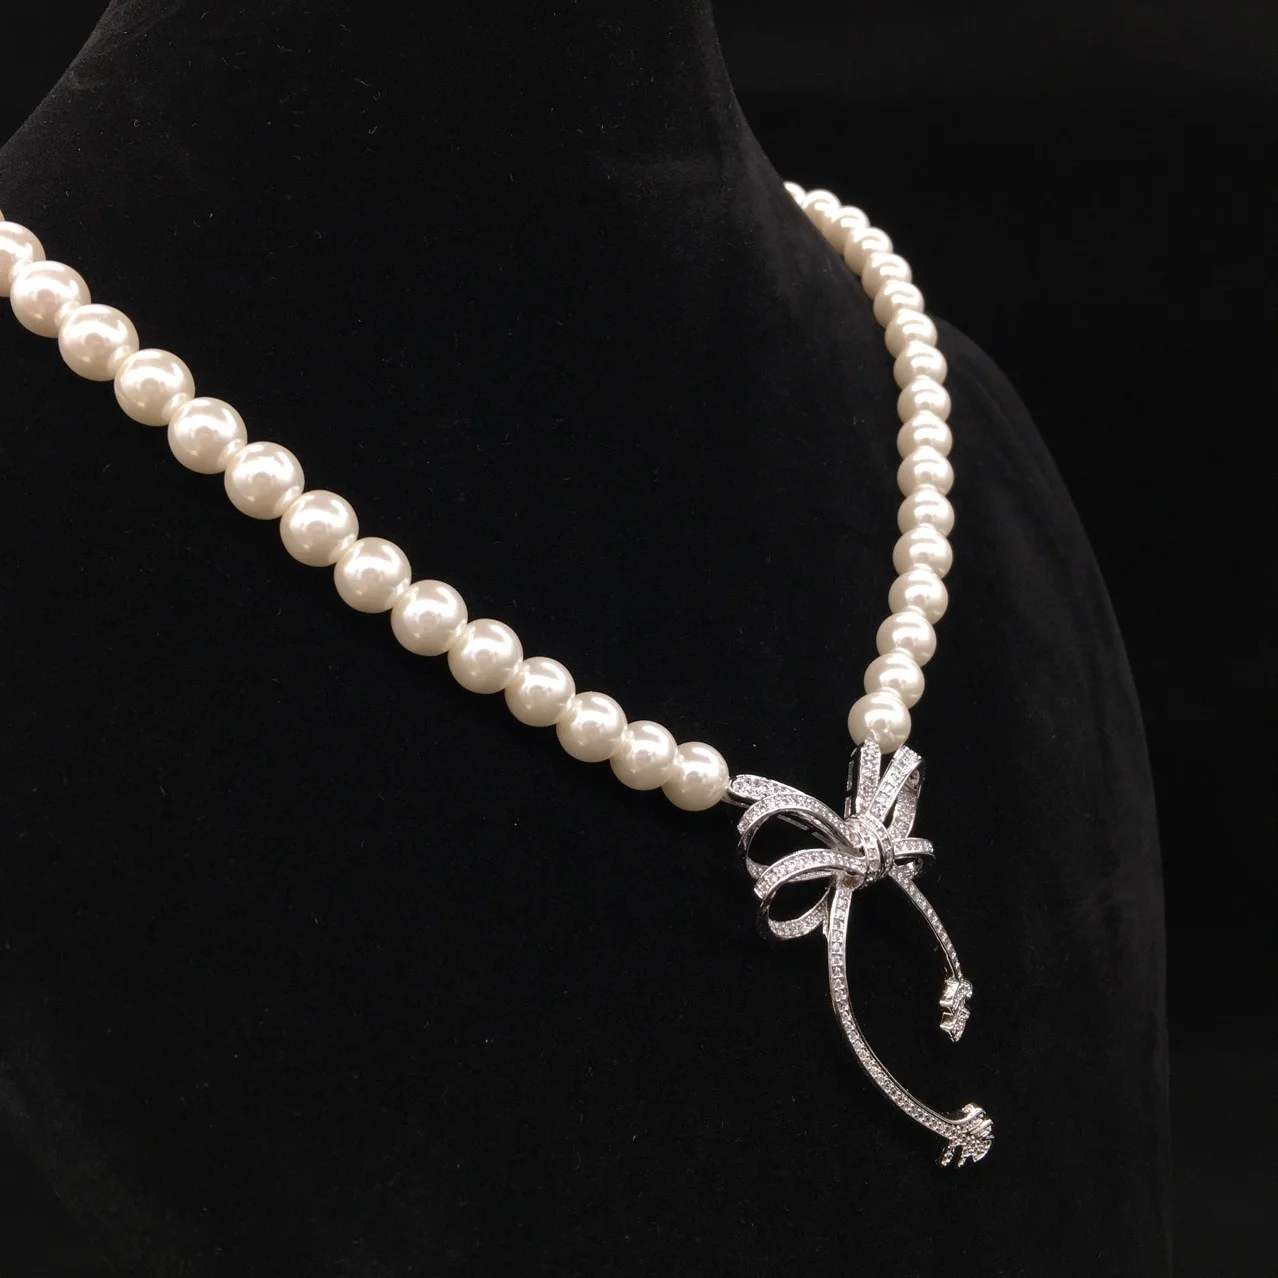 Bowknot design necklace glass pearl women necklace